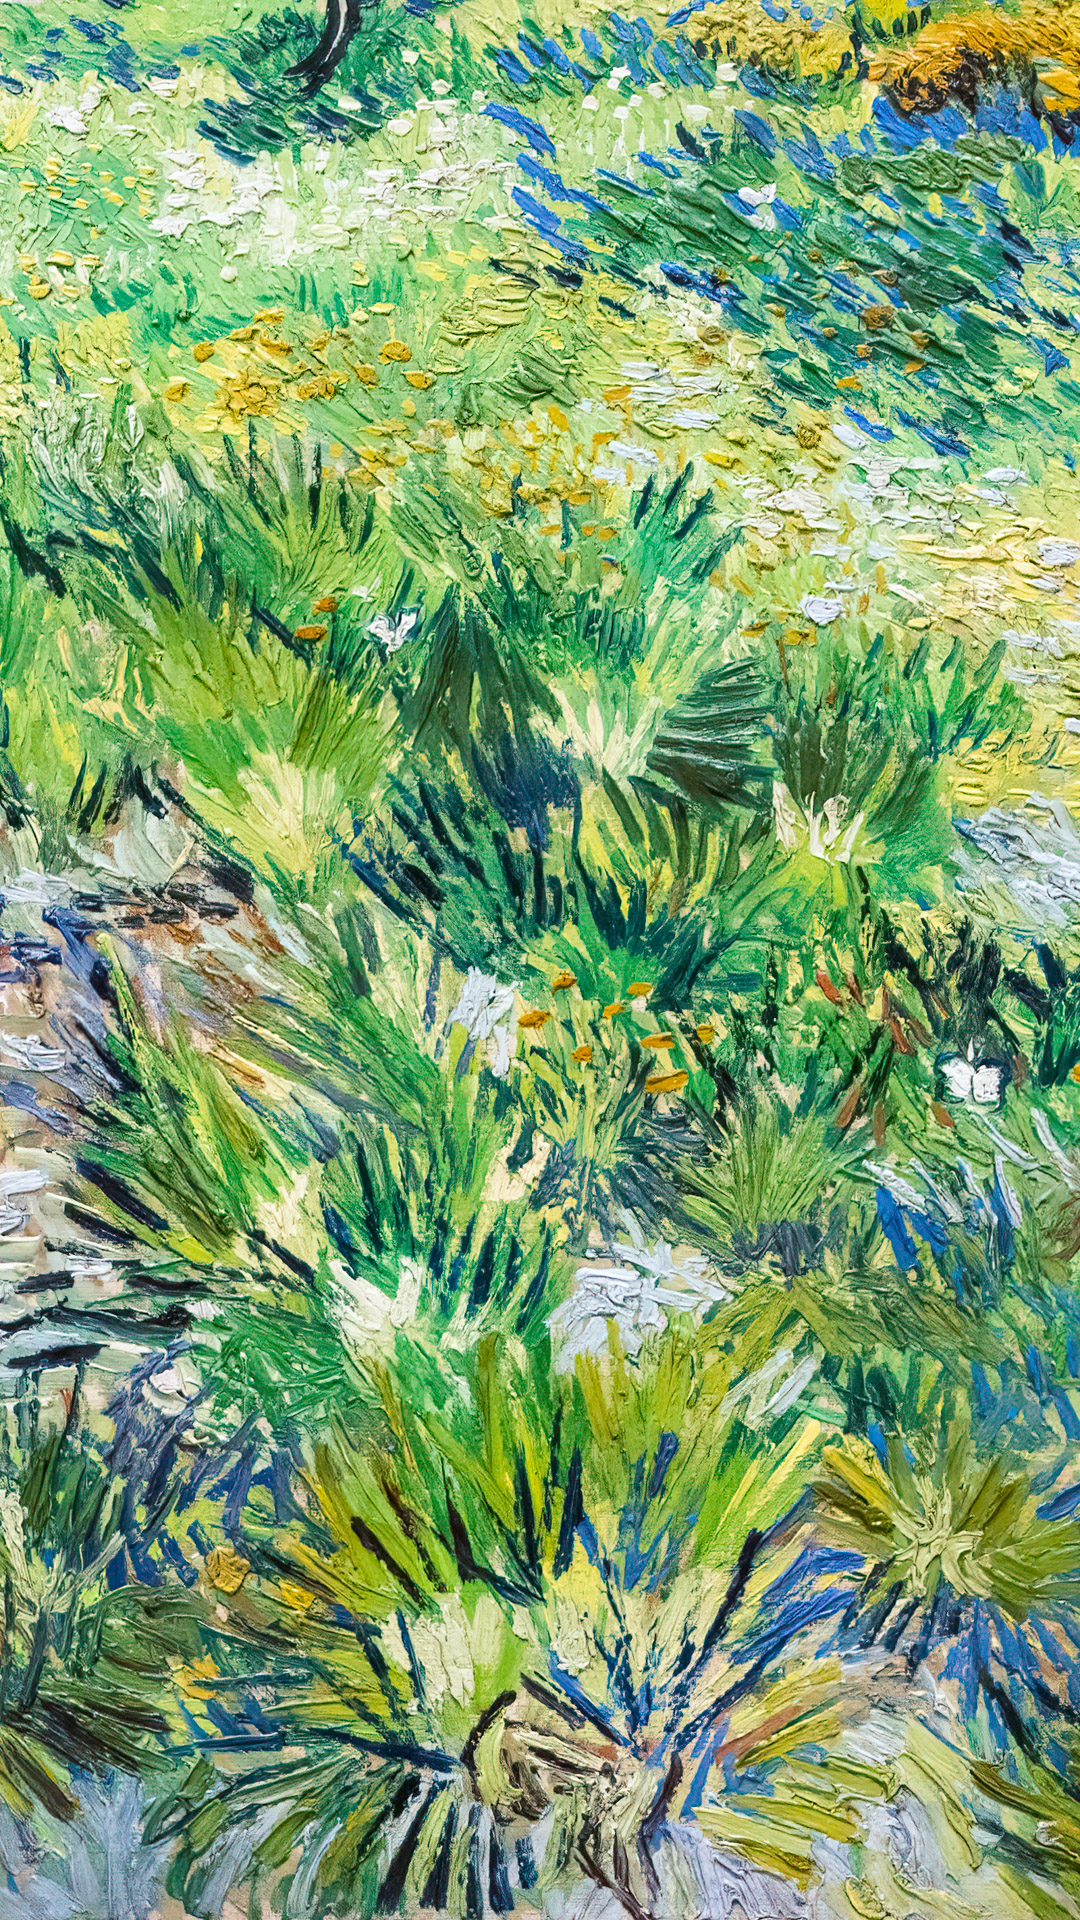 Step into the tranquility of Doctor Gachet's Garden, where Van Gogh's phone wallpaper captures the essence of nature in every brushstroke.